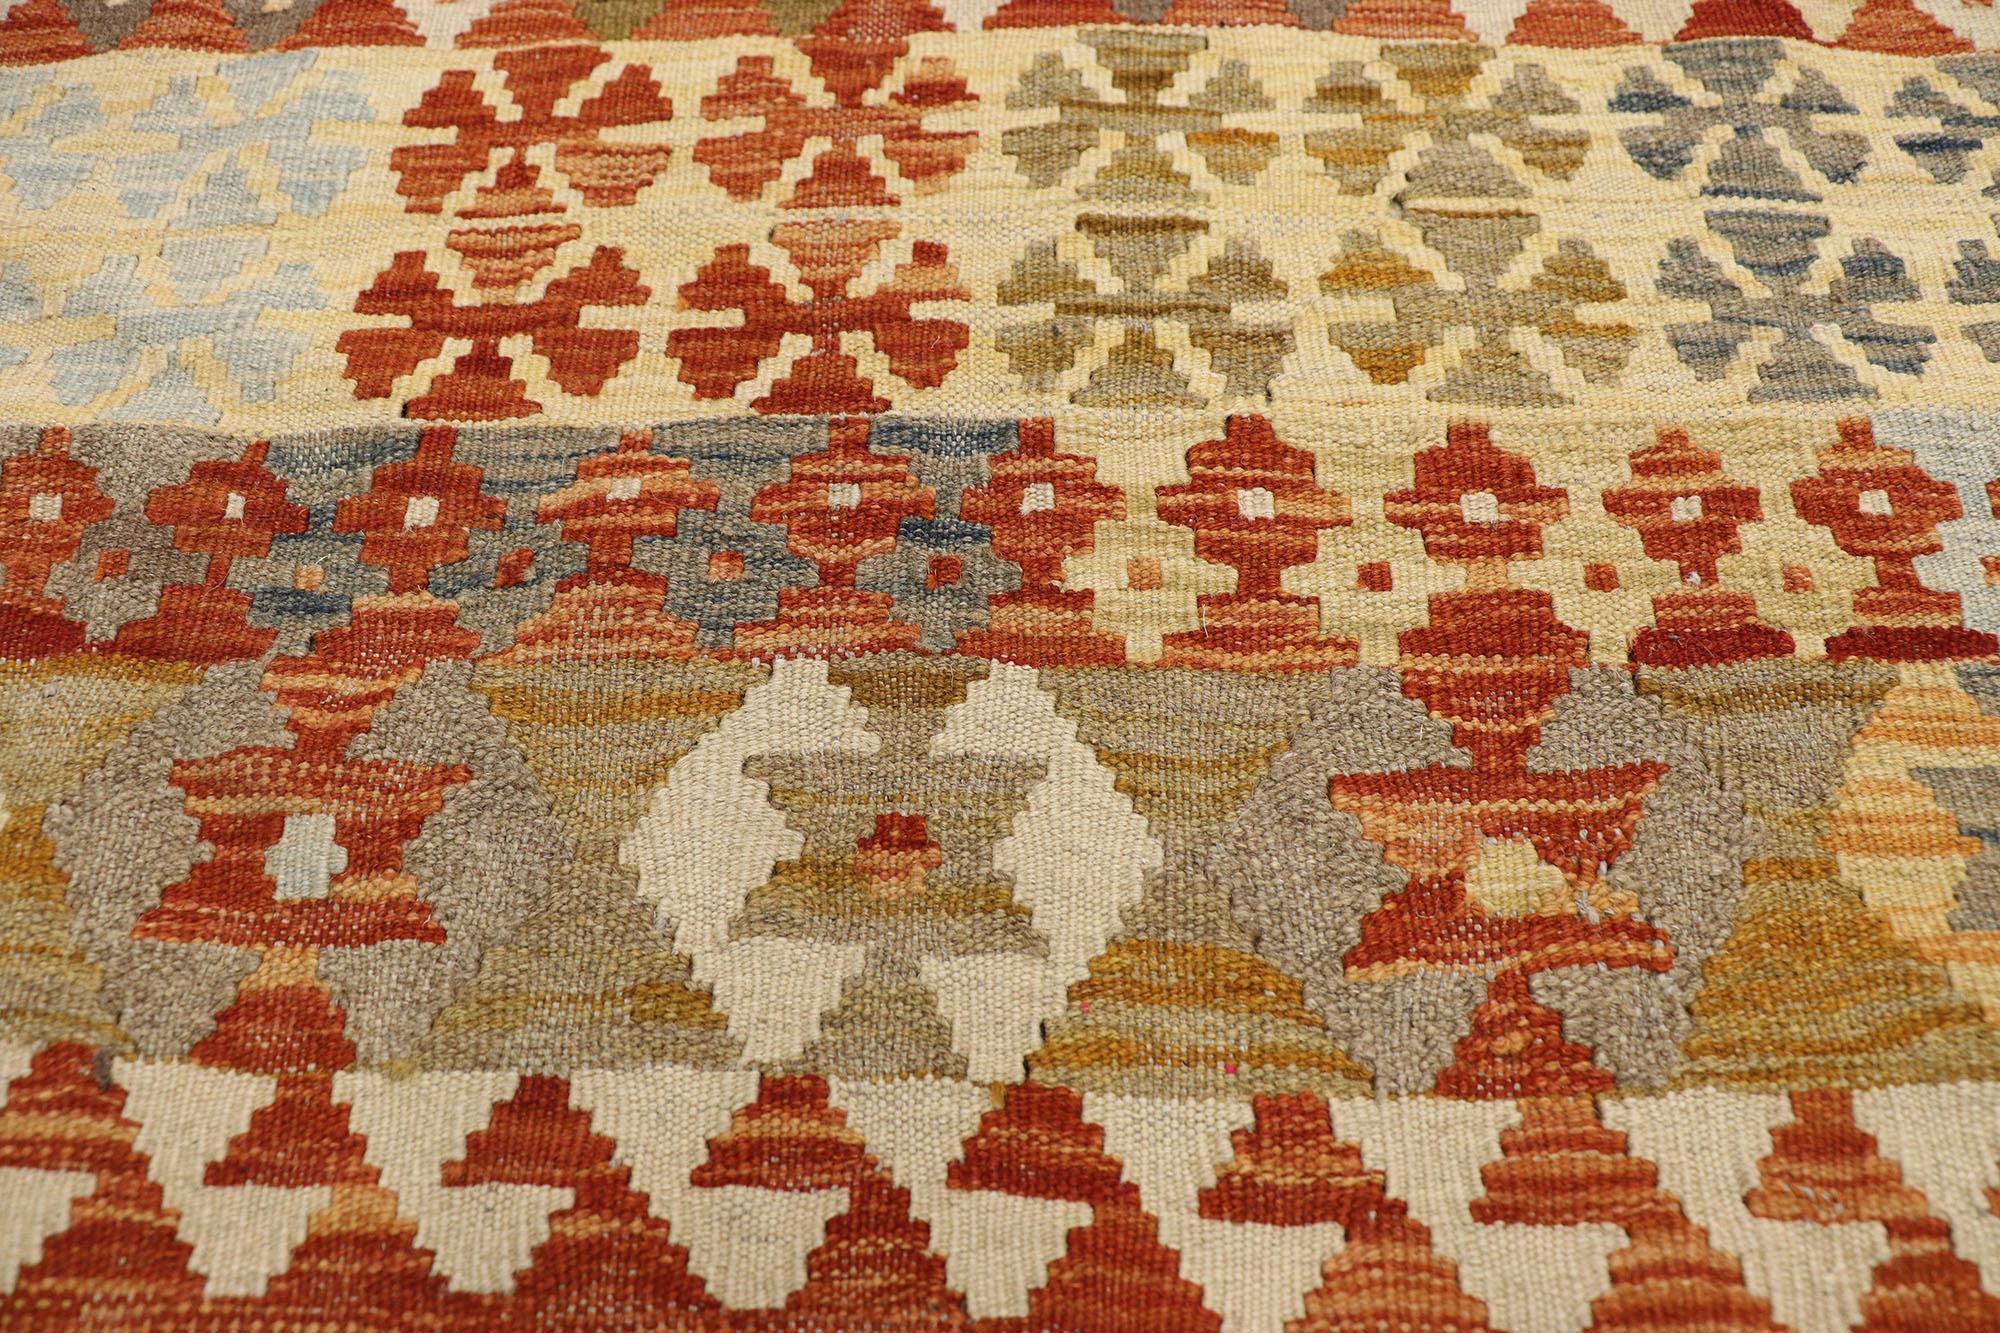 Vintage Afghan Kilim Rug, Southwest Desert Meets Contemporary Santa Fe In Good Condition For Sale In Dallas, TX